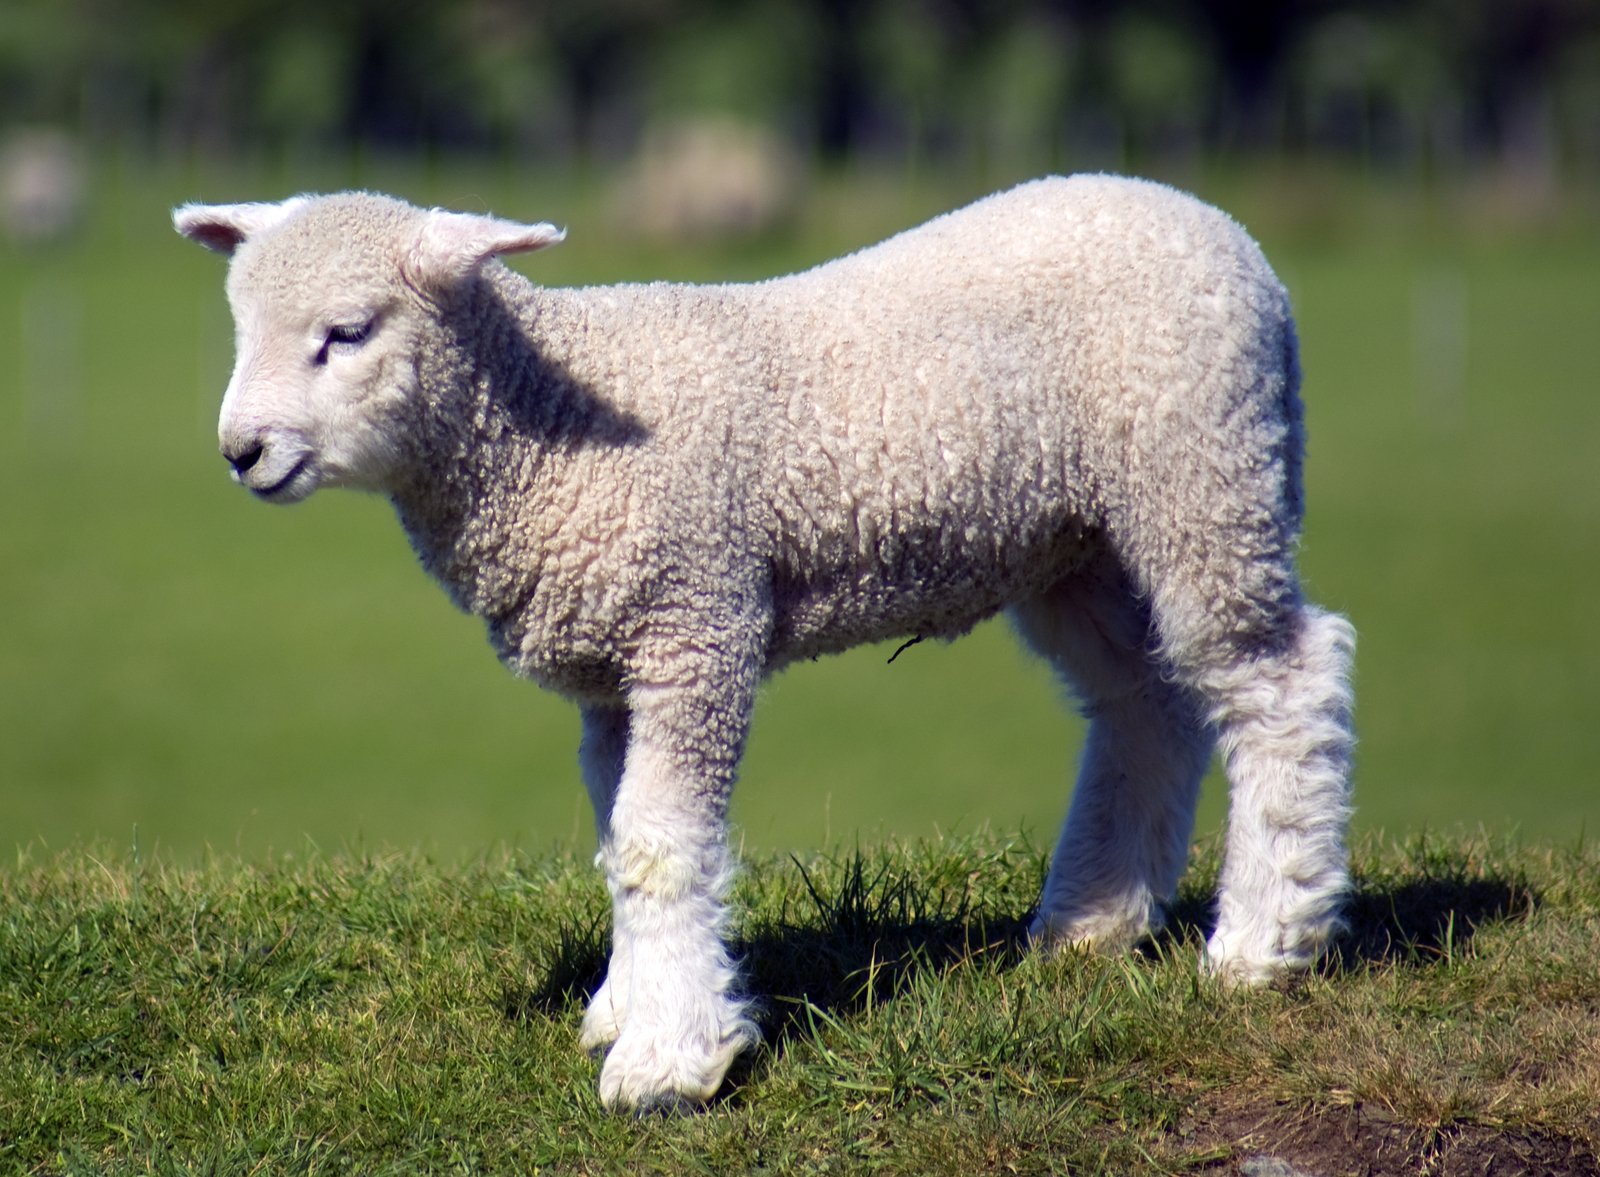 a small sheep standing in the grass looking at the camera